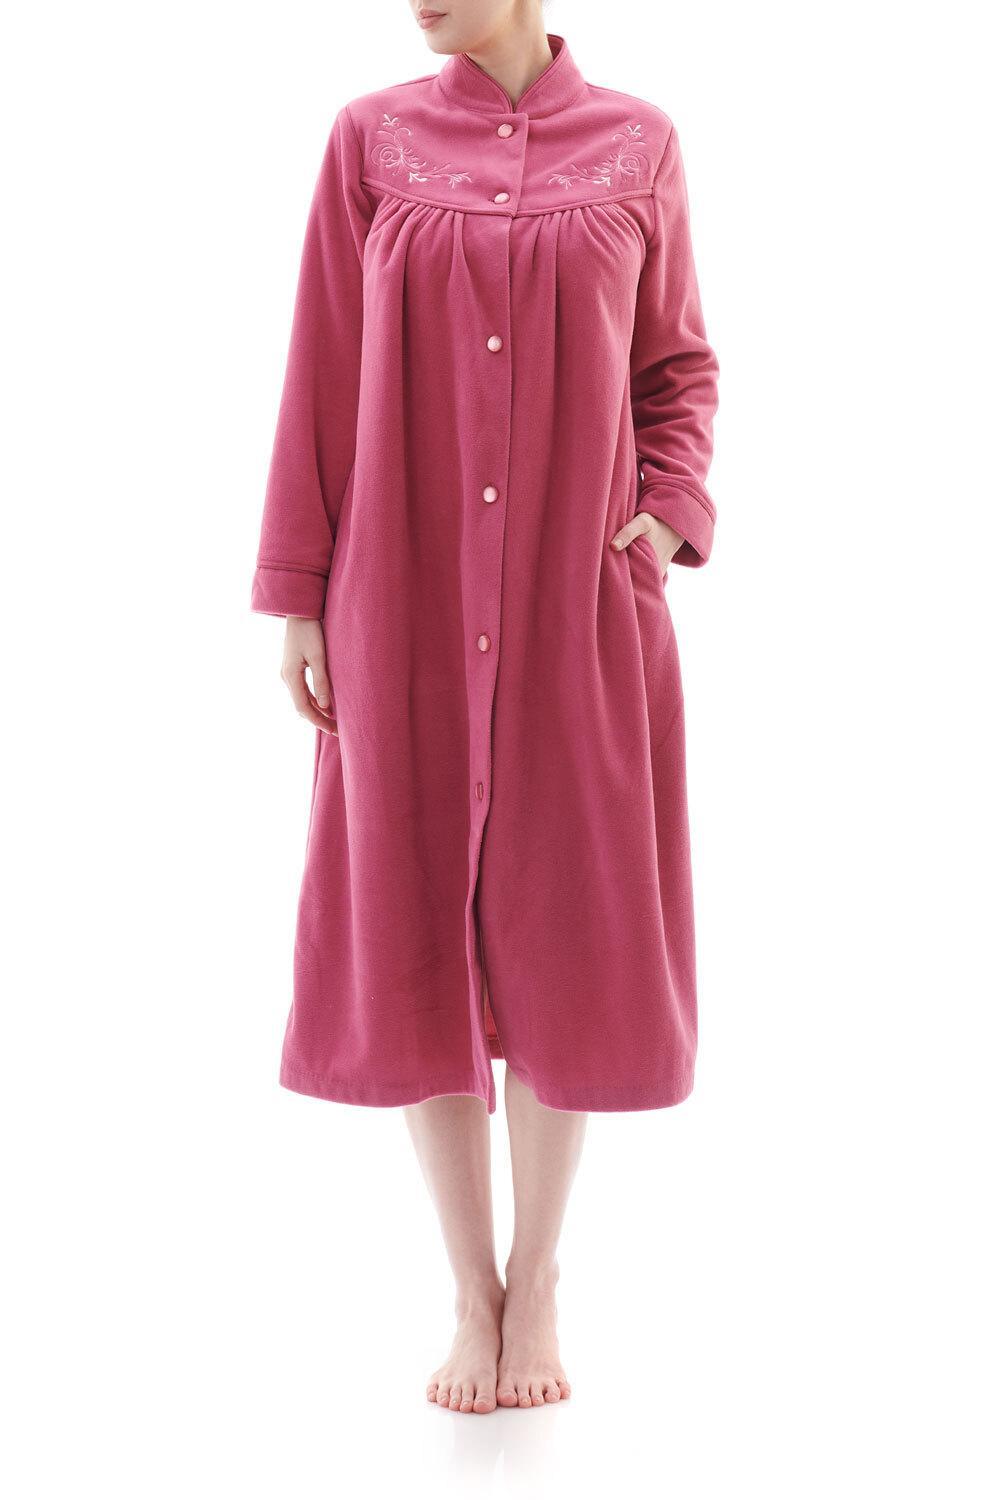 Ladies Givoni Dusty Pink Mid Length Button Dressing Gown Bath Robe (7GB80) [Size: XLarge]